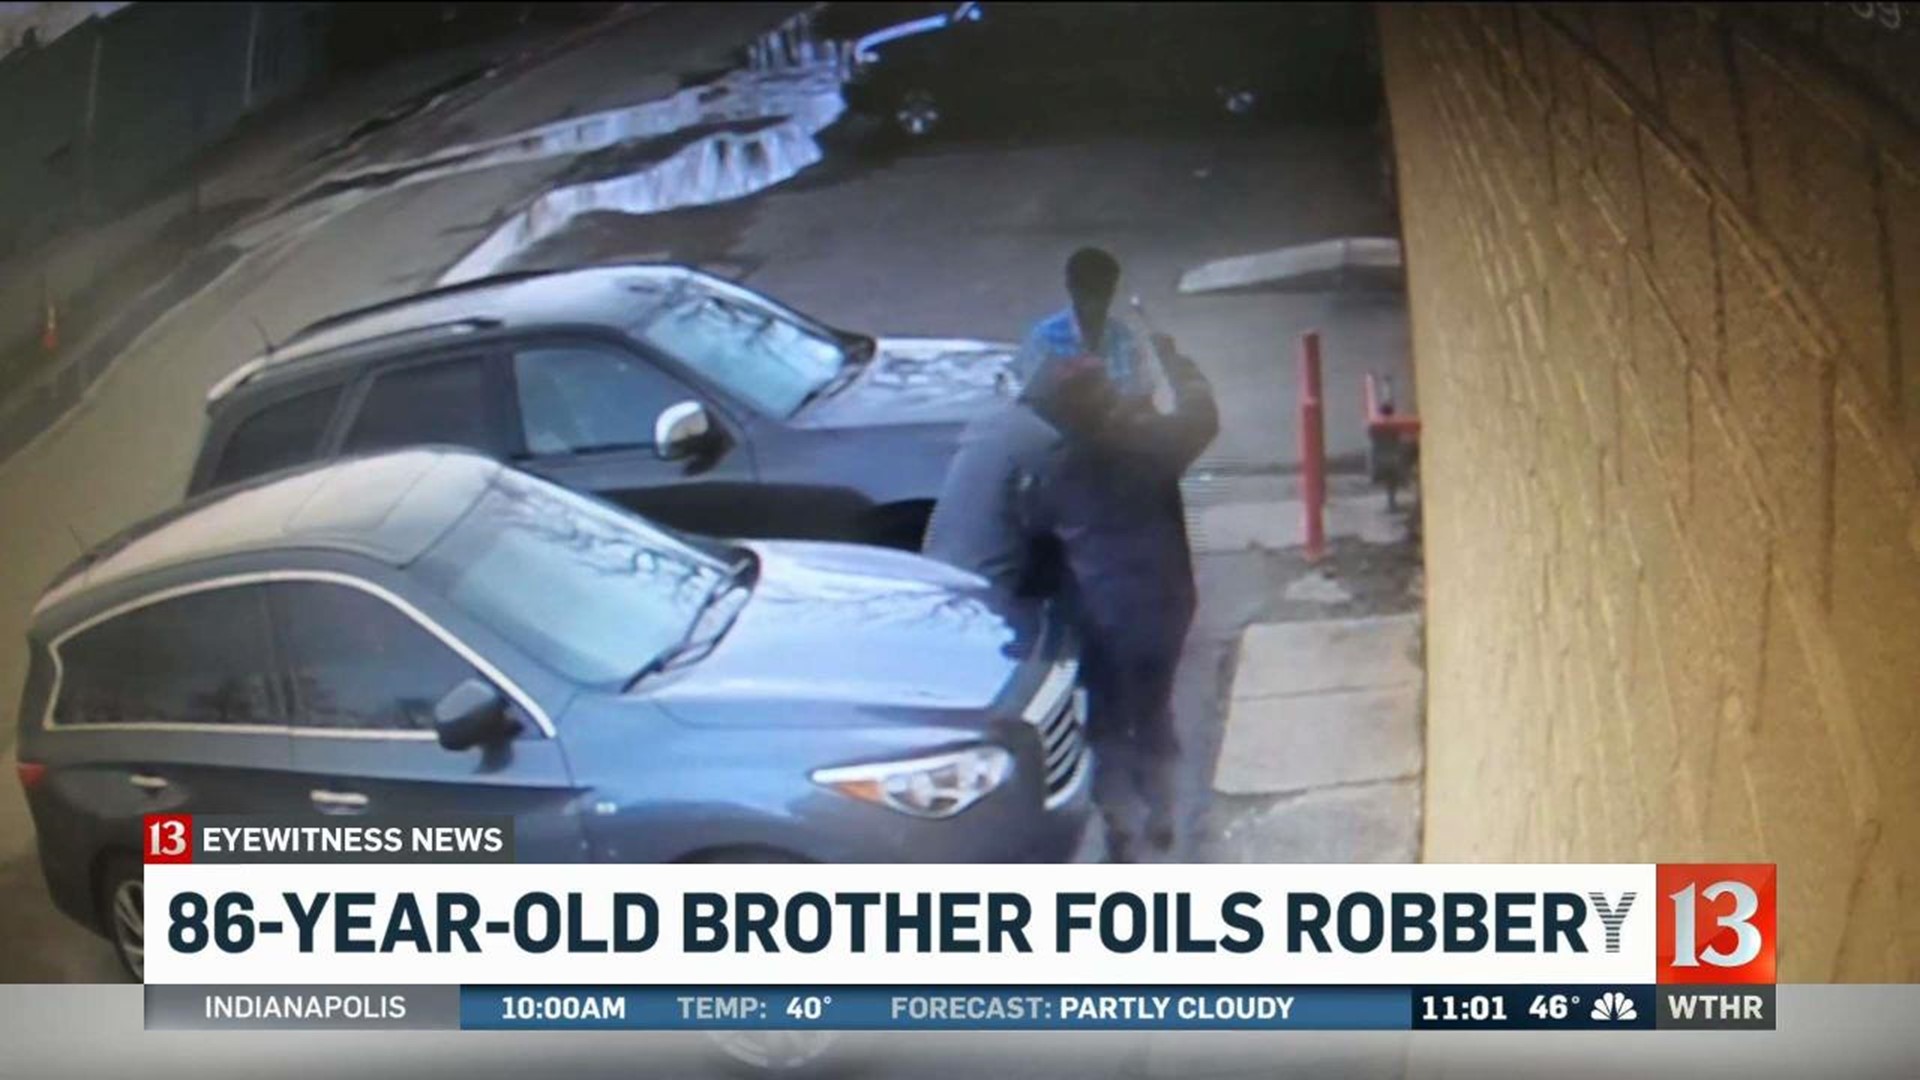 Man comes to aid of sibling being robbed